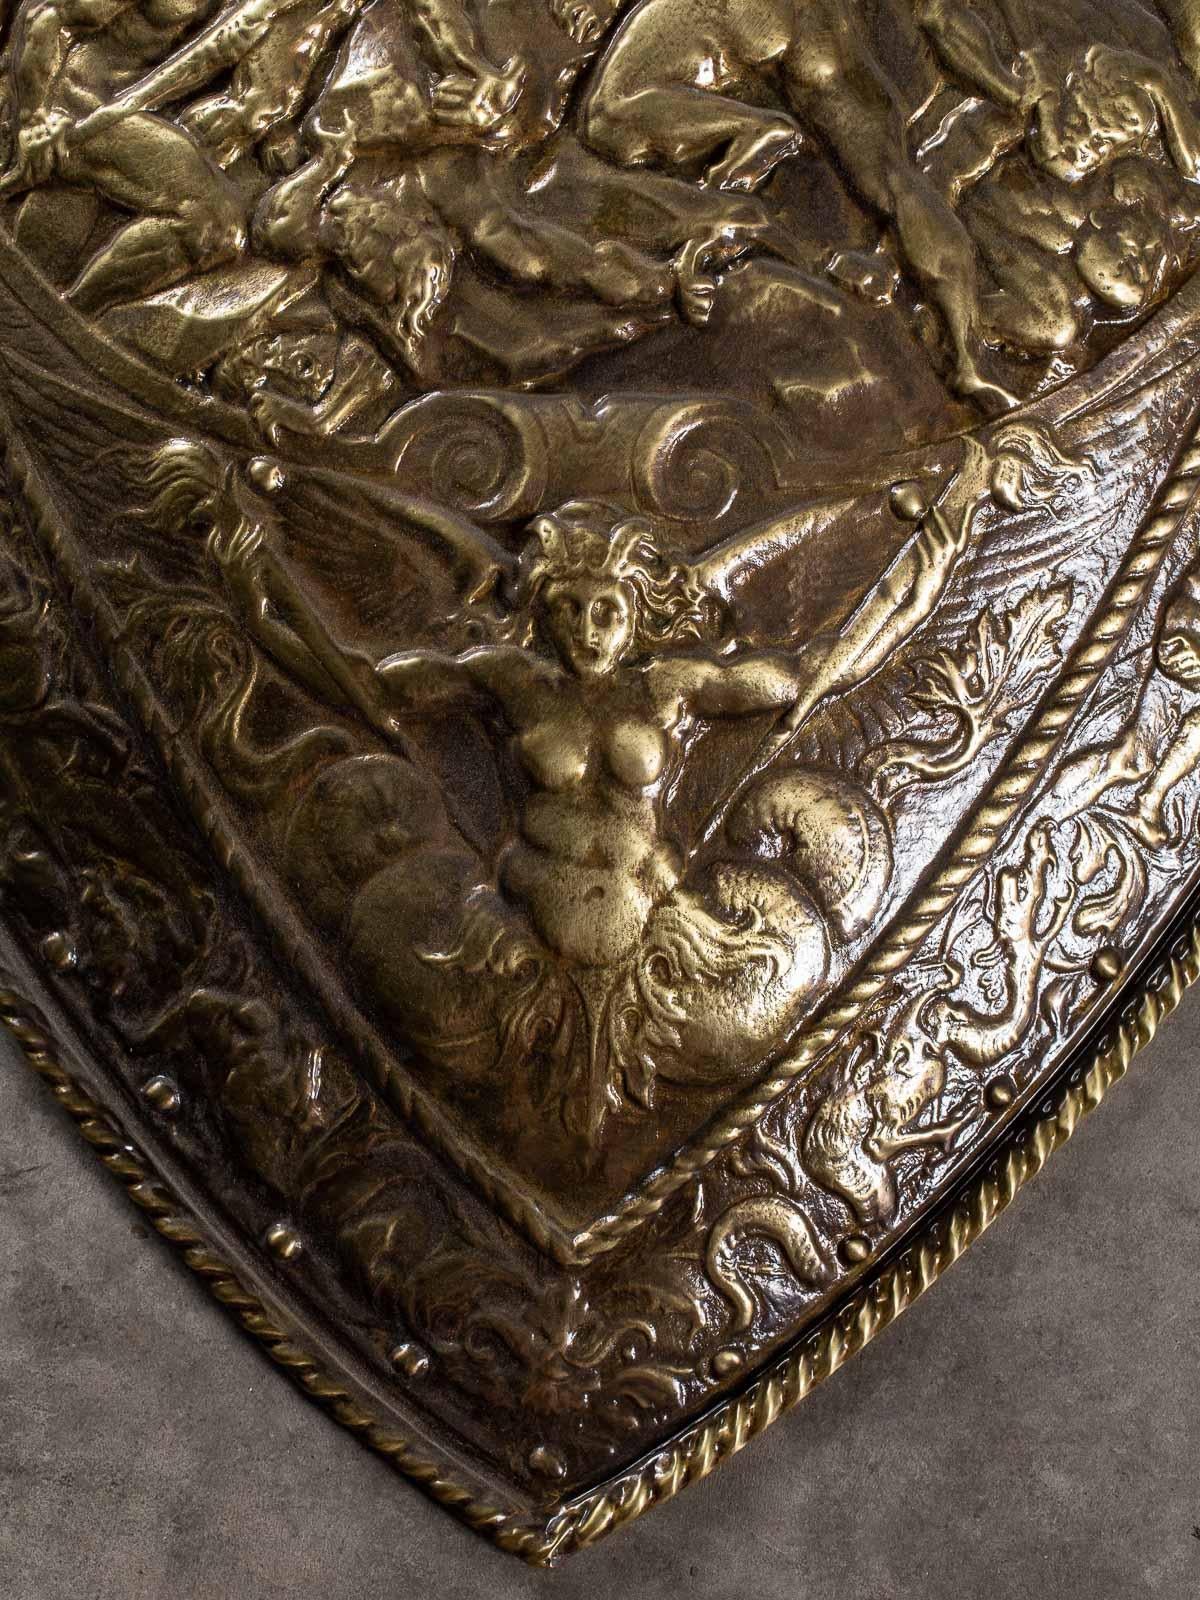 A striking Dutch parade shield circa 1880 featuring a Baroque style scene of warring figures. The inverted teardrop shape has a double border of ribbon twist with a band of male and females interspersed with dragons. In the center at the top is a